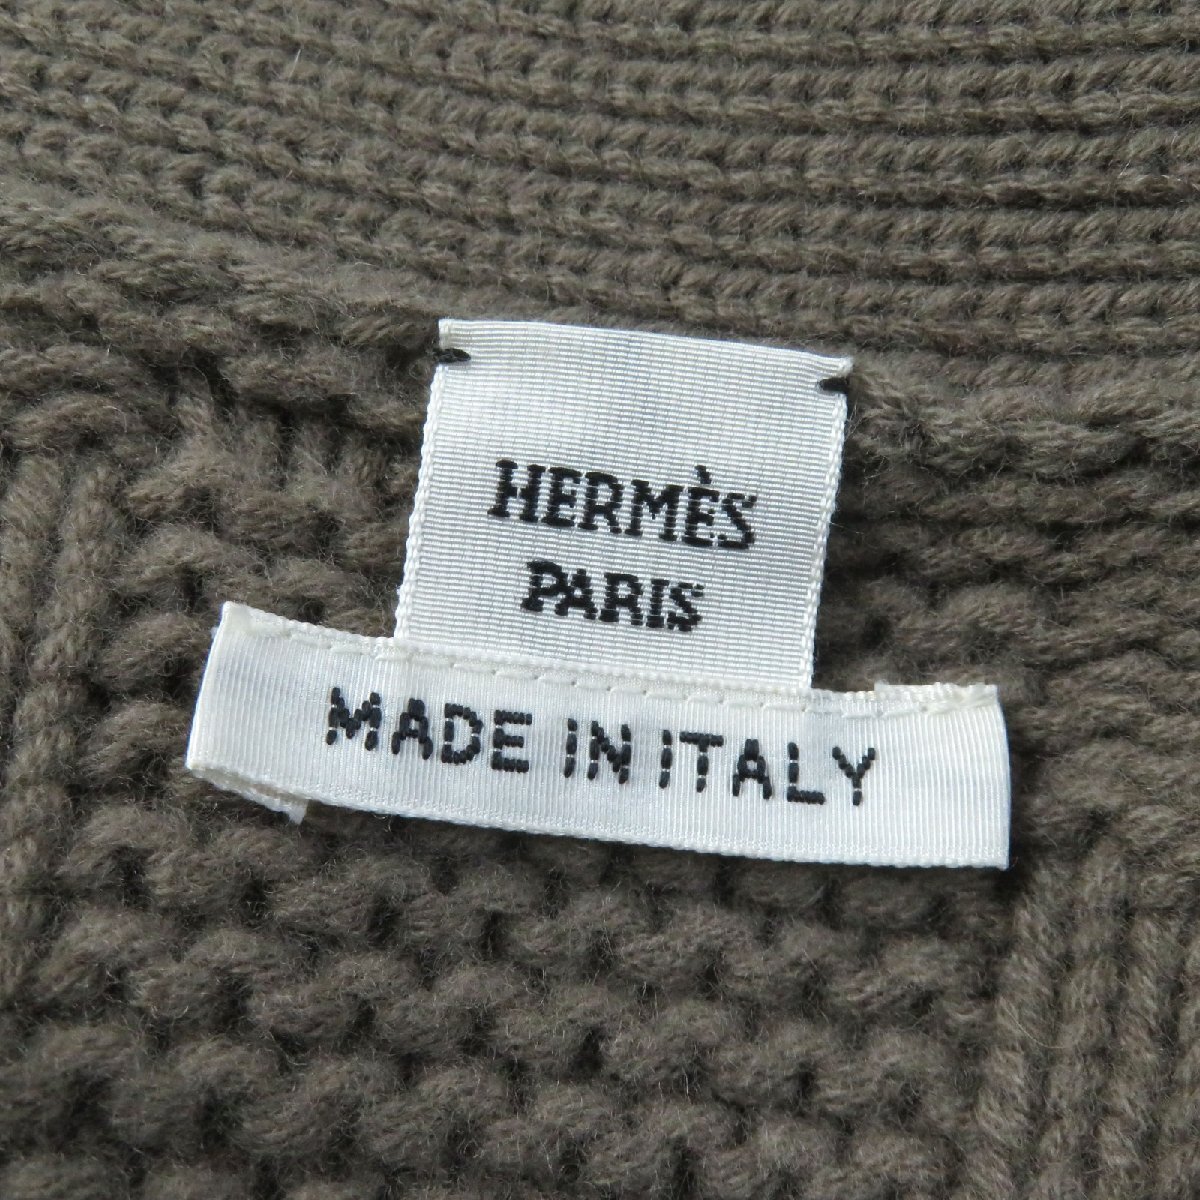  unused goods *HERMES Hermes regular price 243100 jpy 23AW Serie button attaching H motif V neck cardigan brown group 38 made in Italy regular goods lady's 